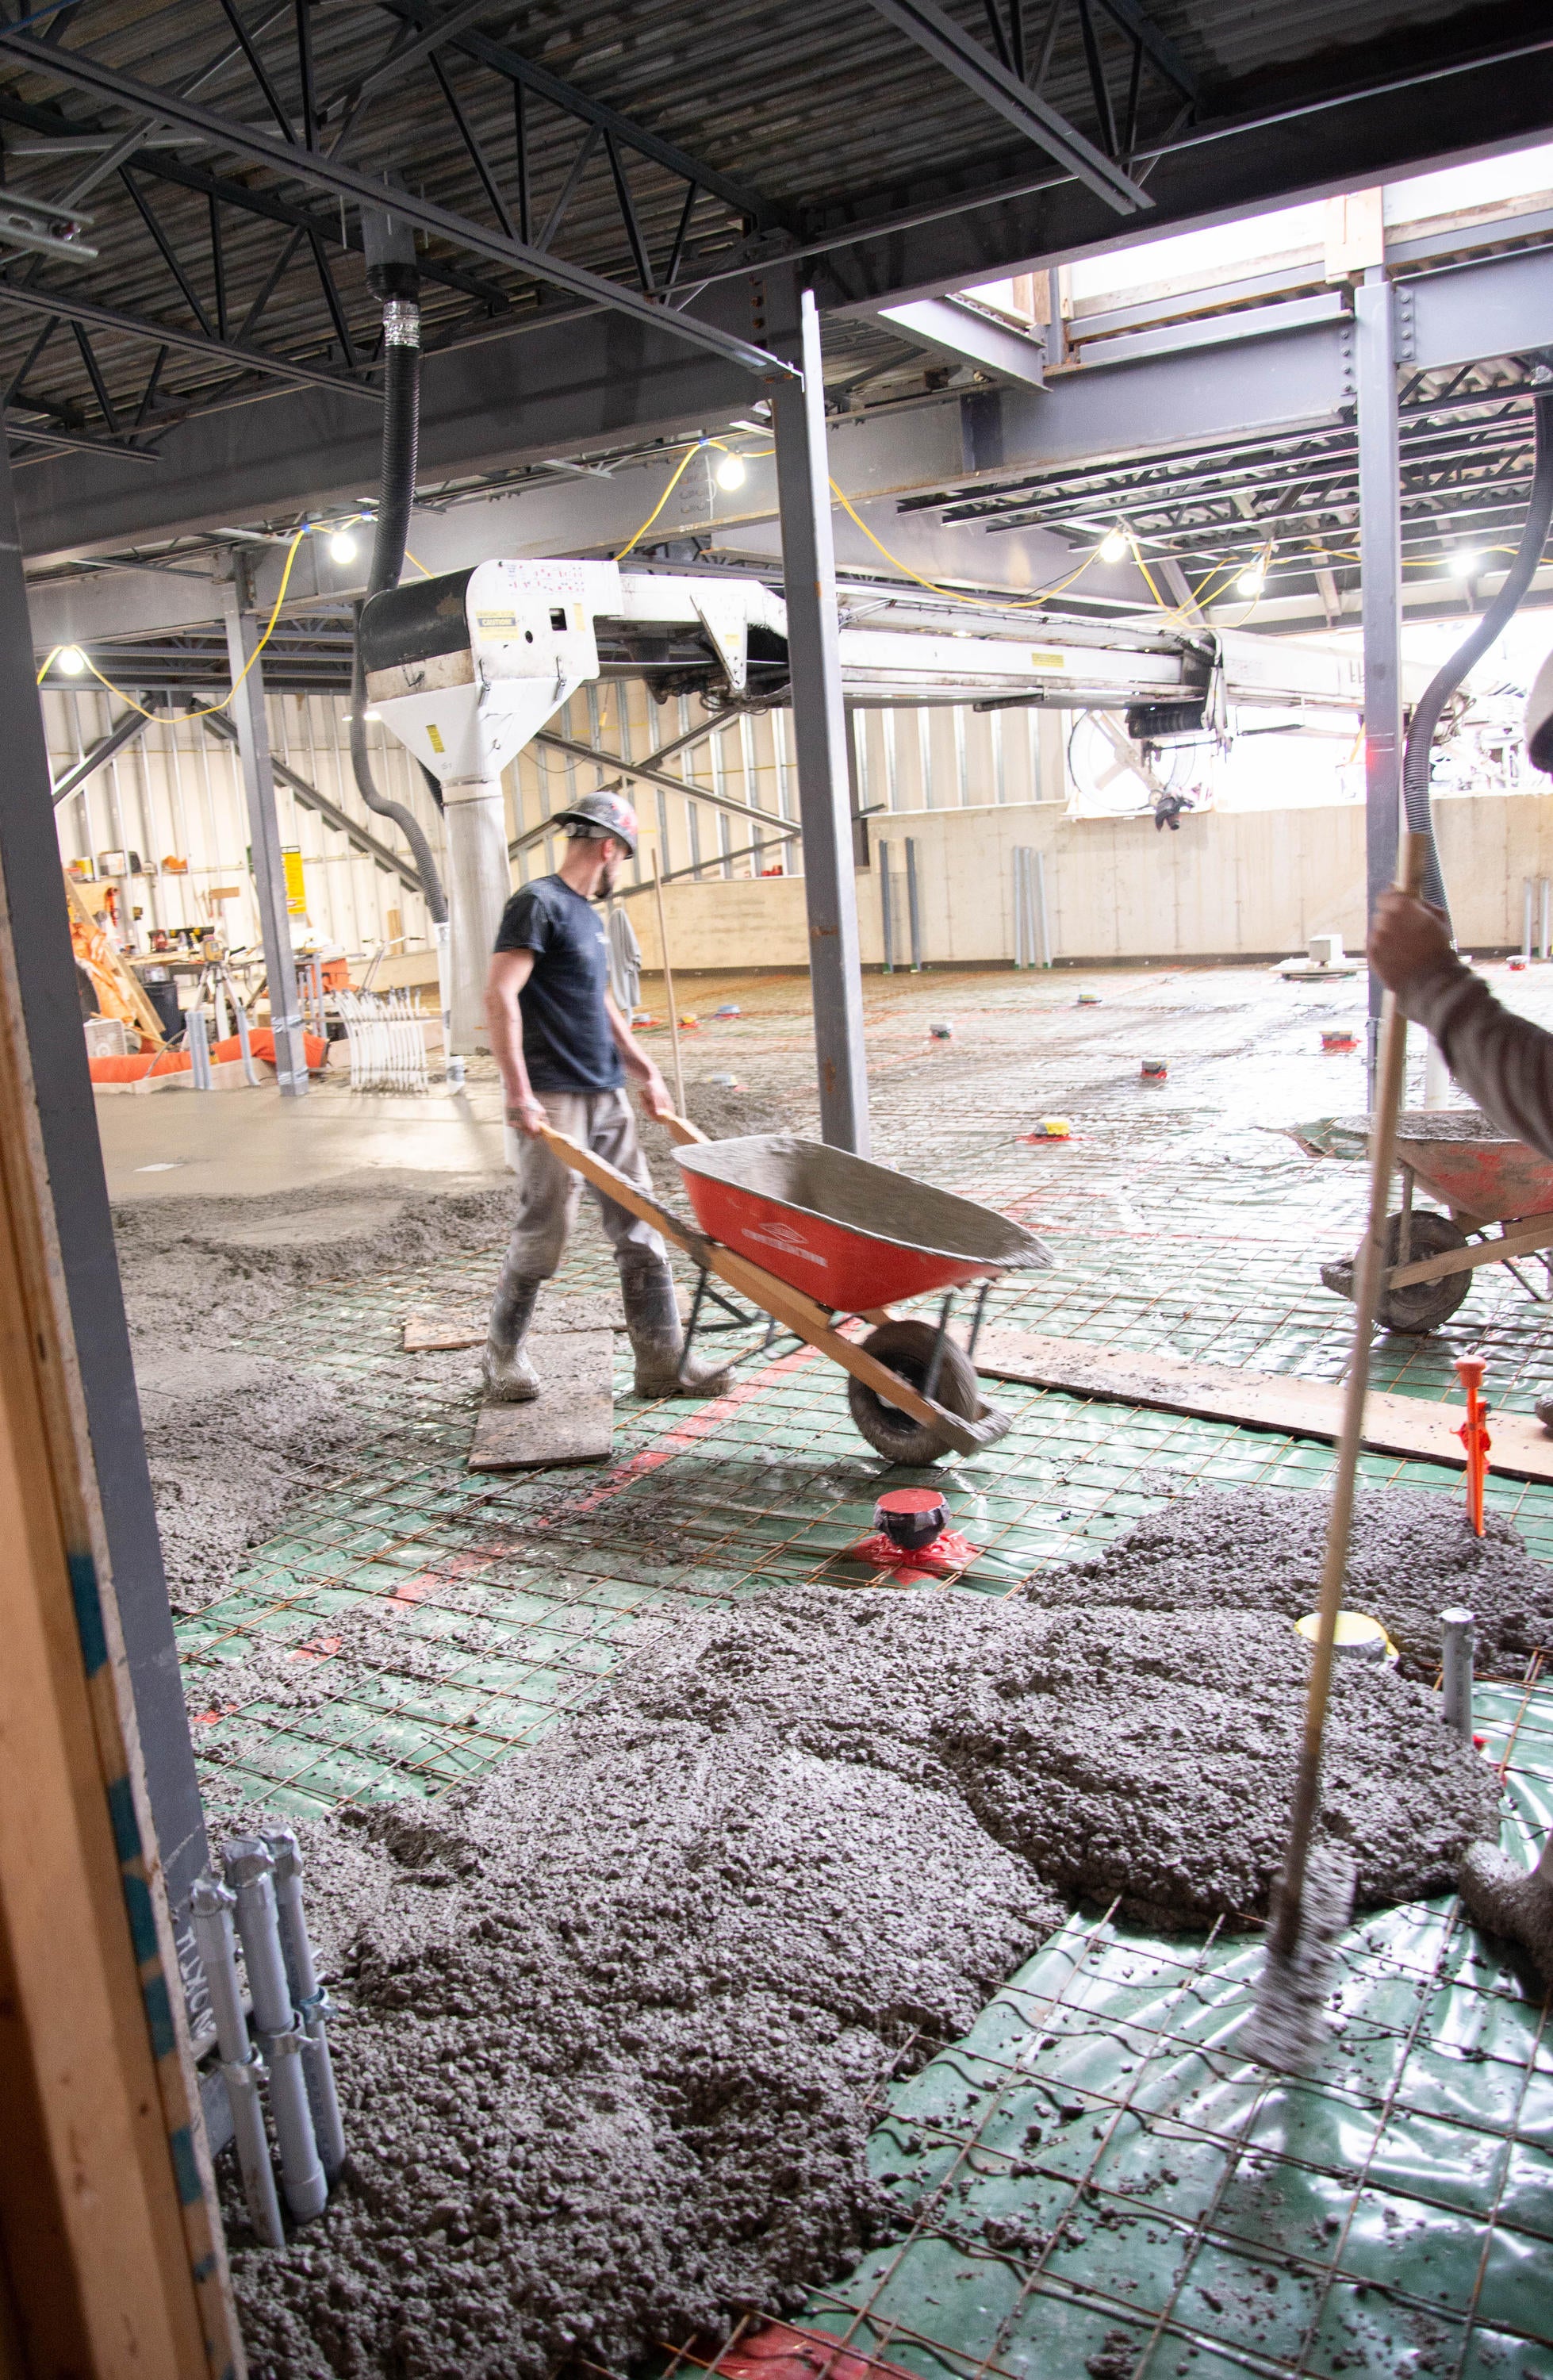 Concrete being poured from a wheel barrow in the new kitchen space